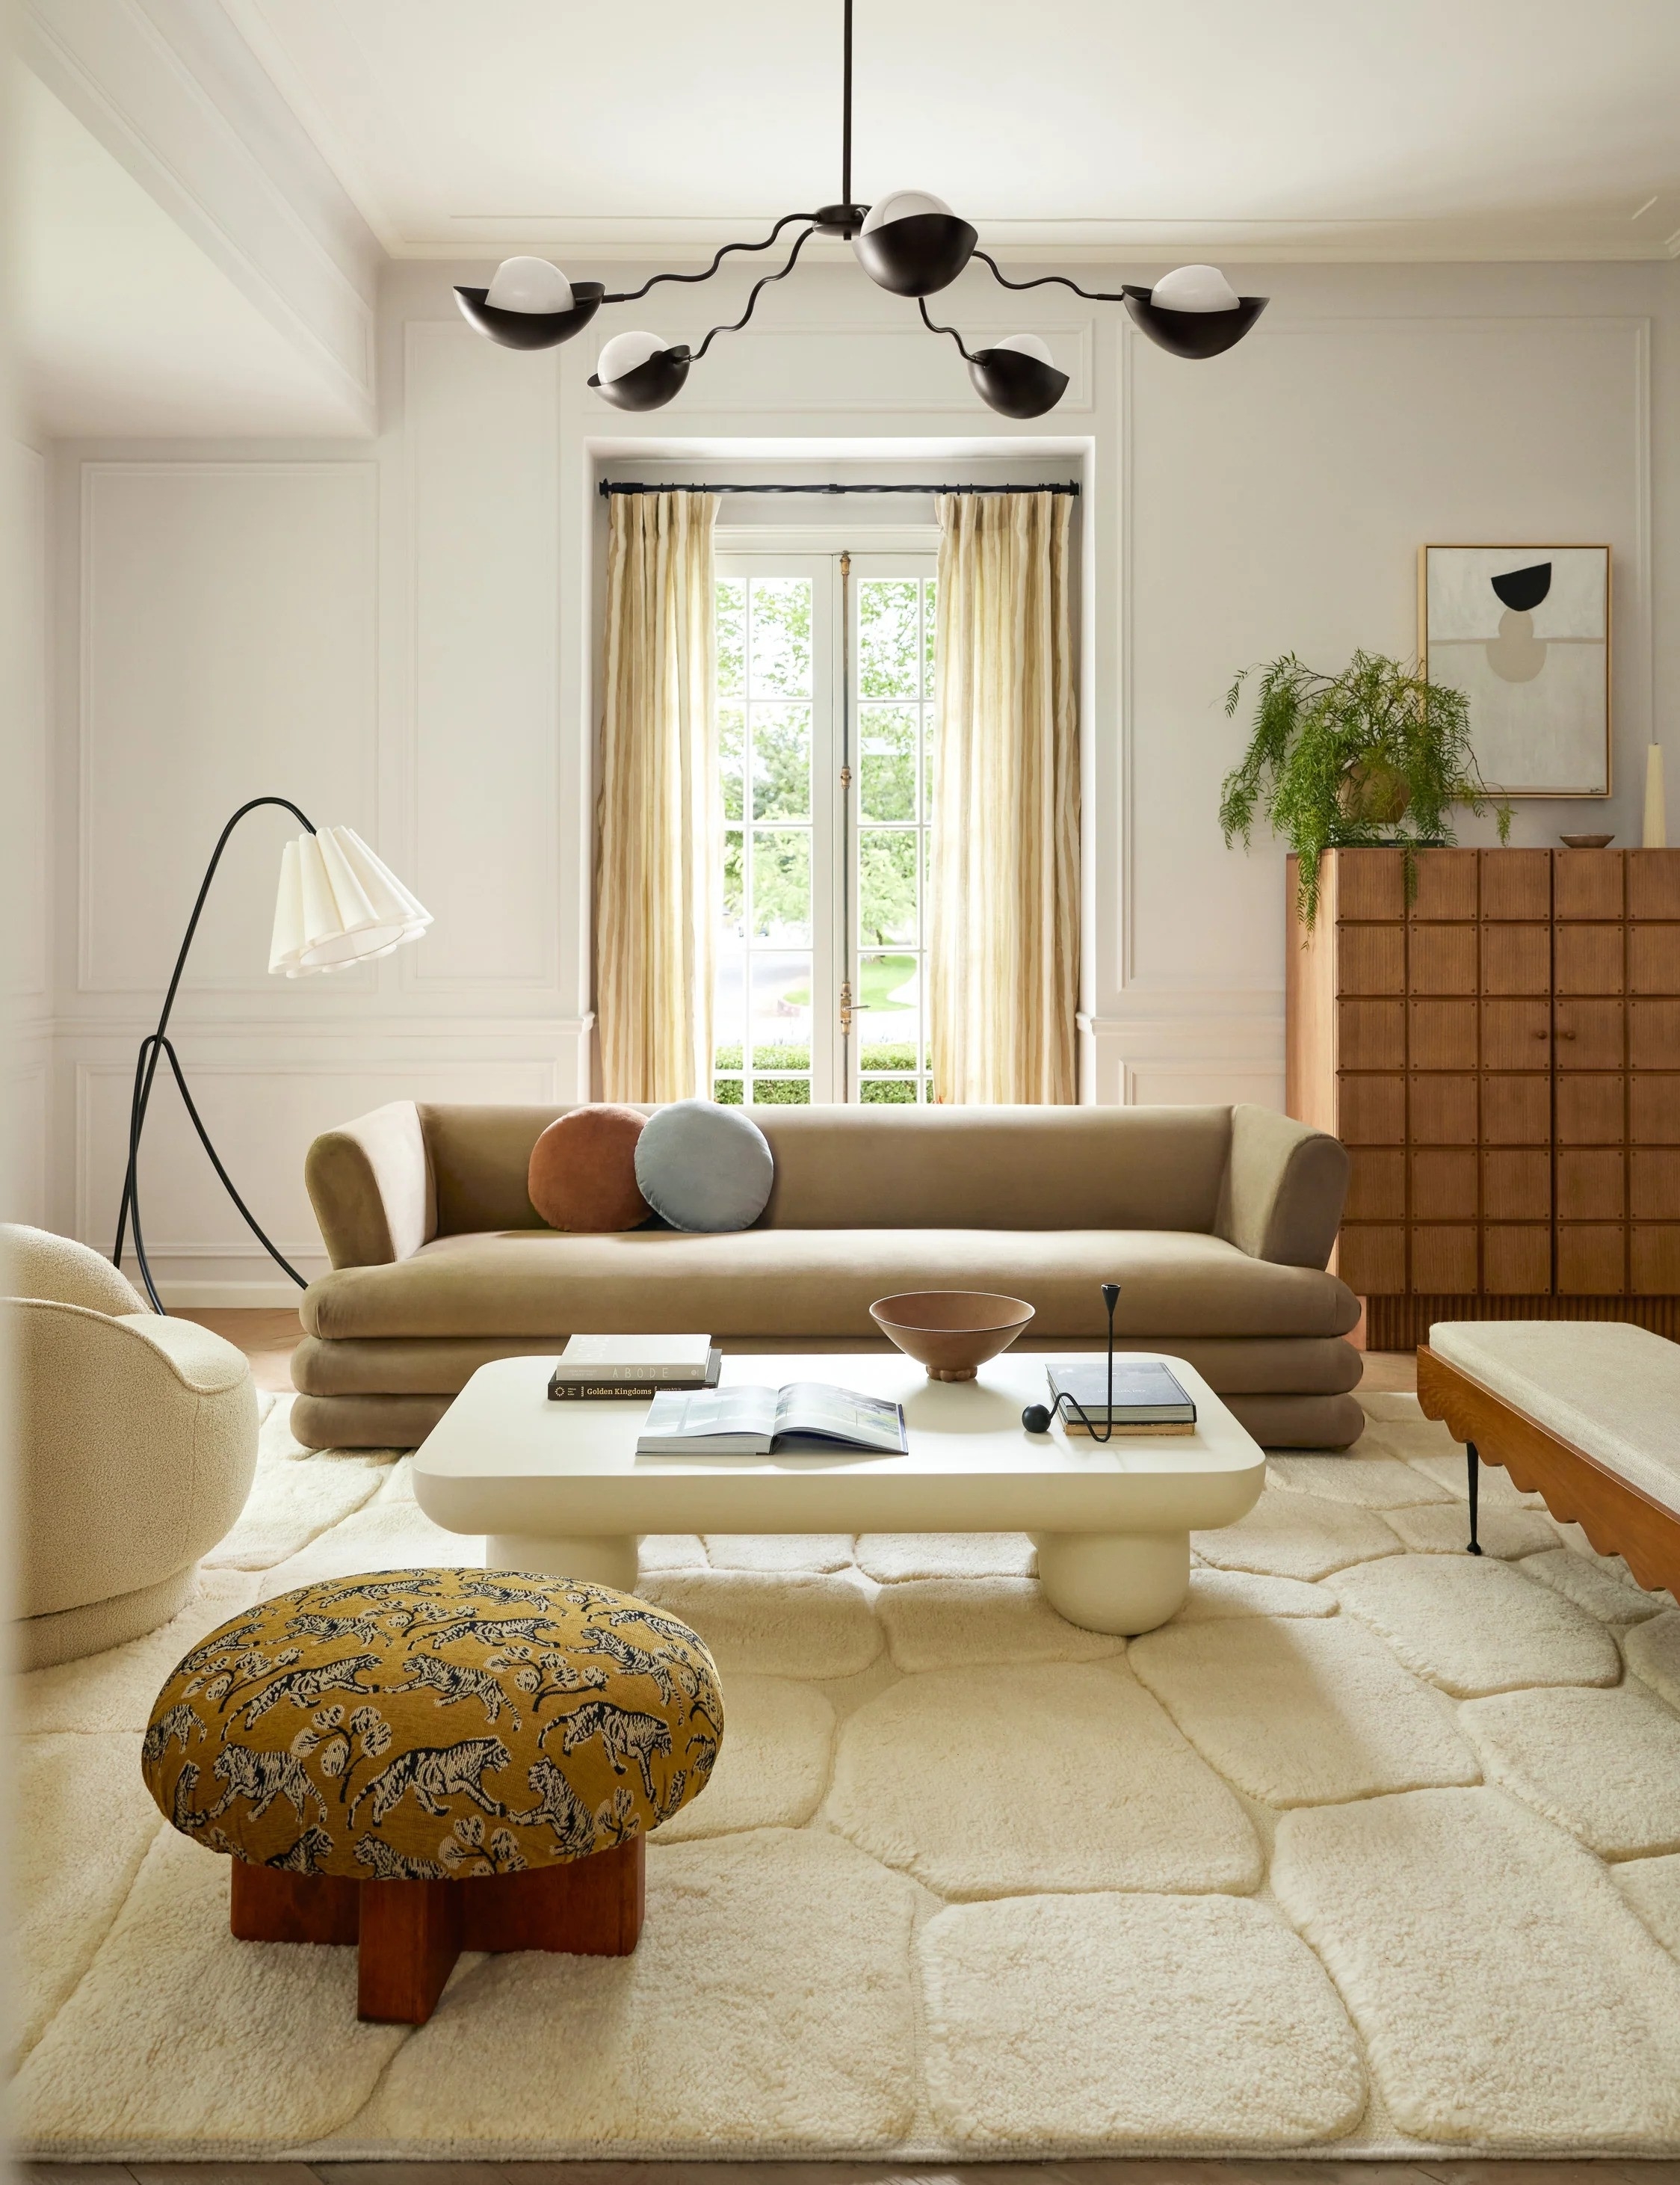 Elegant living room with a mix of modern furniture including a sofa, chairs, and an eclectic stool